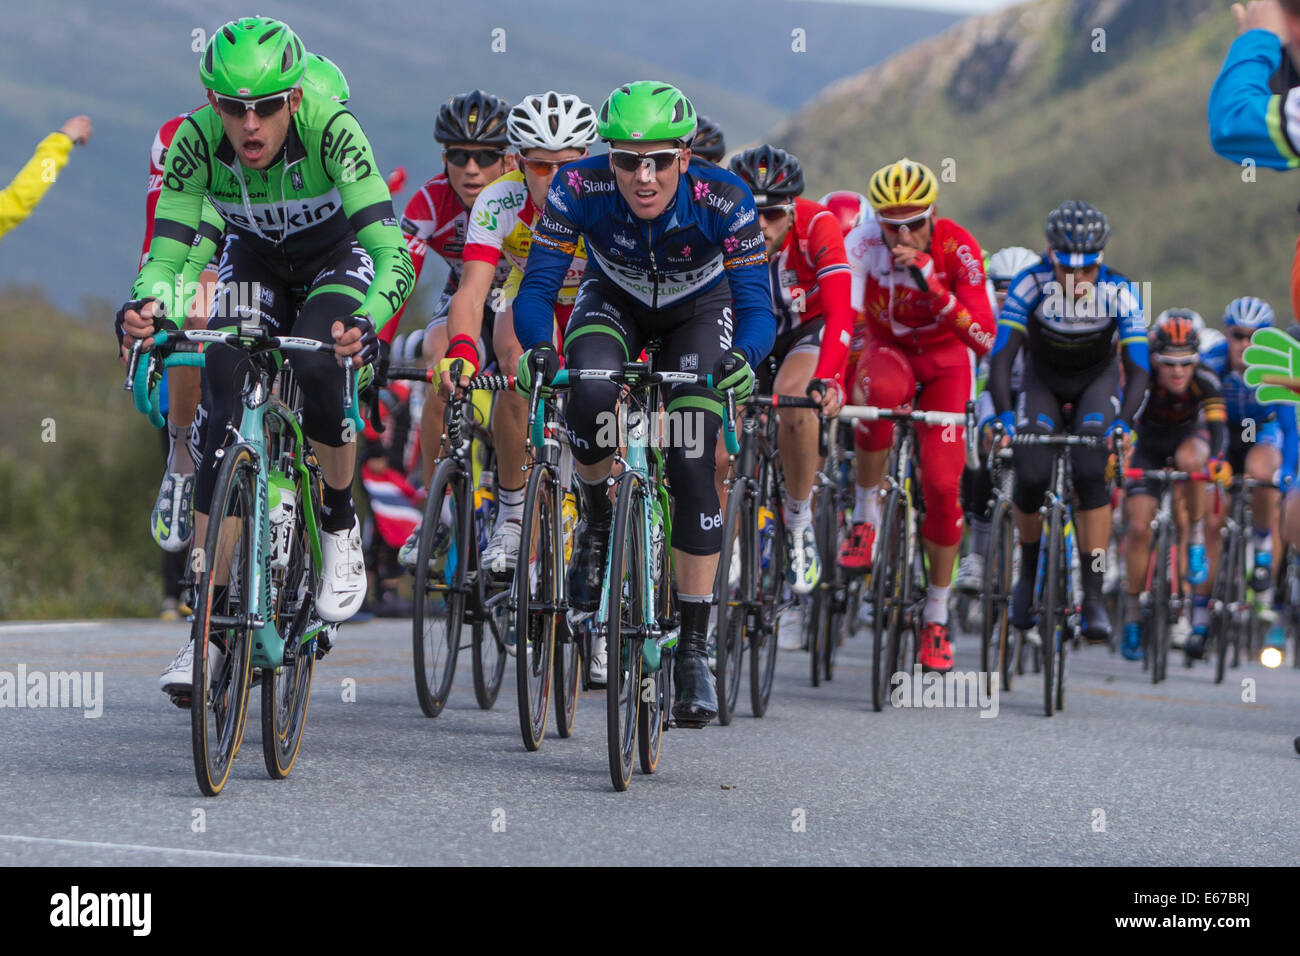 Tromsoe, Norway. 17th Aug, 2014. Arctic Race of Norway 2014, day 3 The peloton is passing during the 4th stage of Arctic Race of Norway. Steven Kruijswijk (Belkin Pro Cycling) with the blue leaders jersey on the right in front. The stage was 165km with start and finish in Tromsoe. Credit:  Radarfoto/Alamy Live News Stock Photo